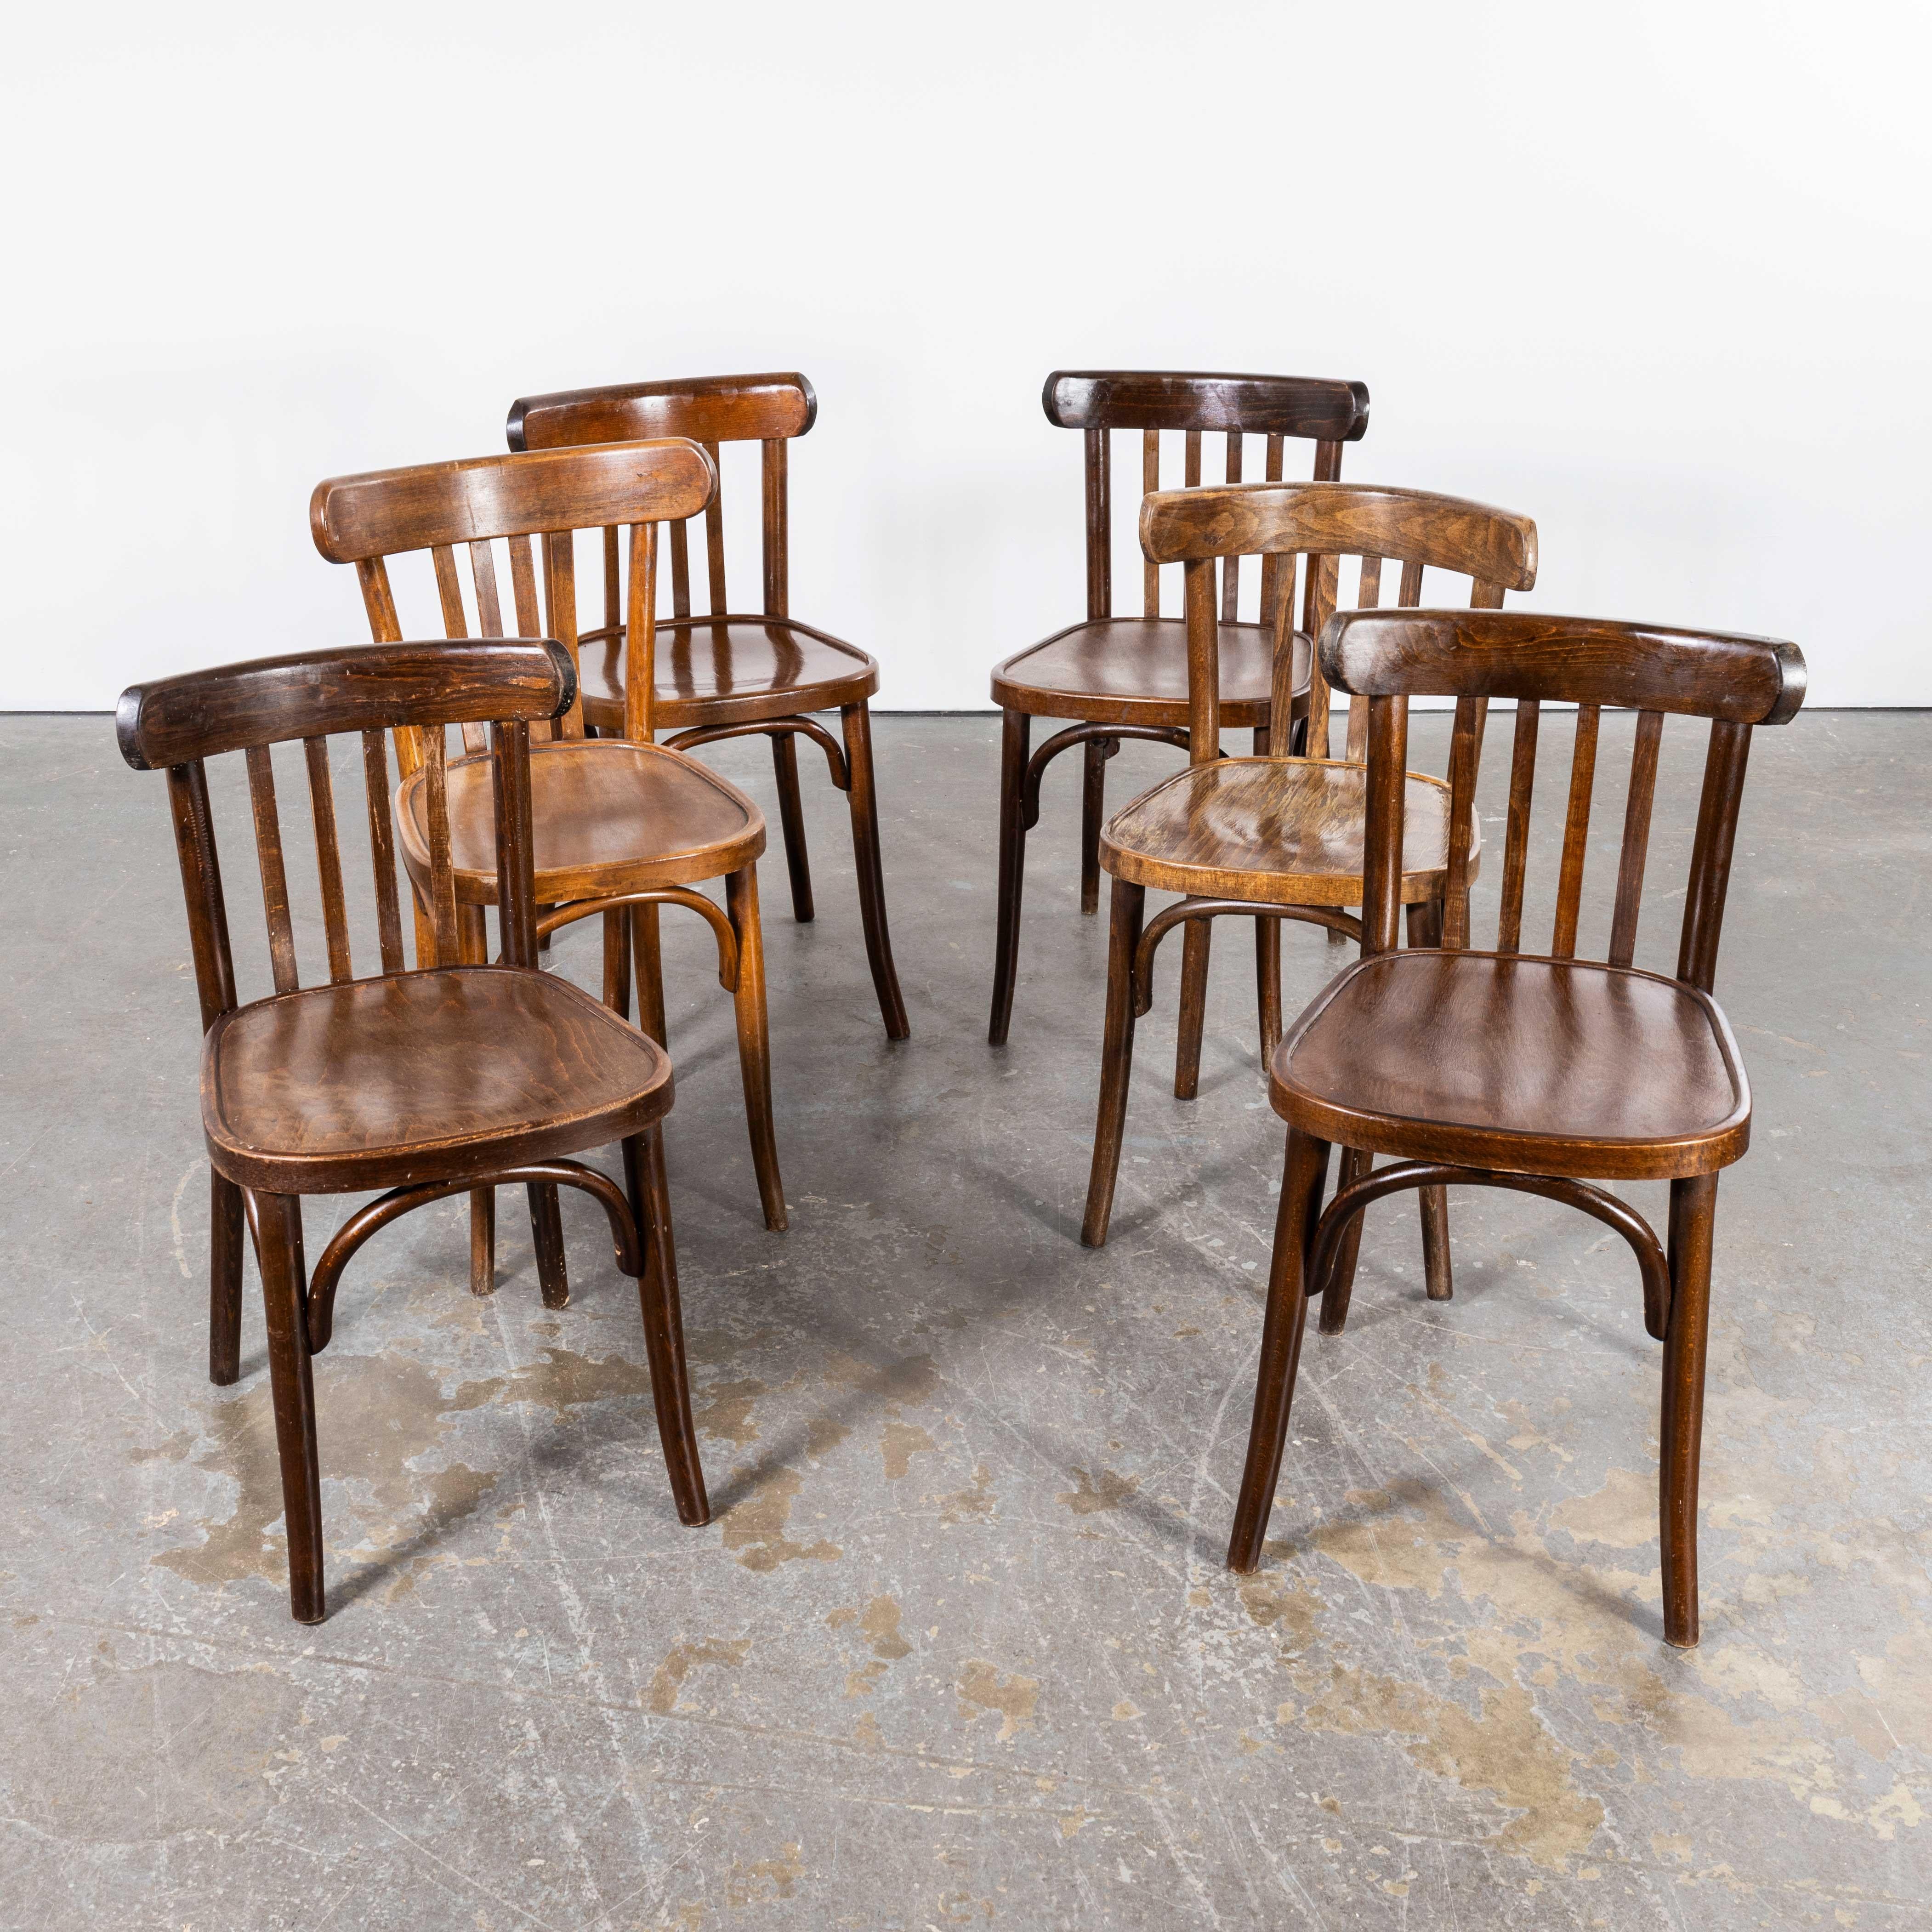 Mid-20th Century 1950’s Standard Classic Bistro Mixed Dining Chairs - Large Quantities Available